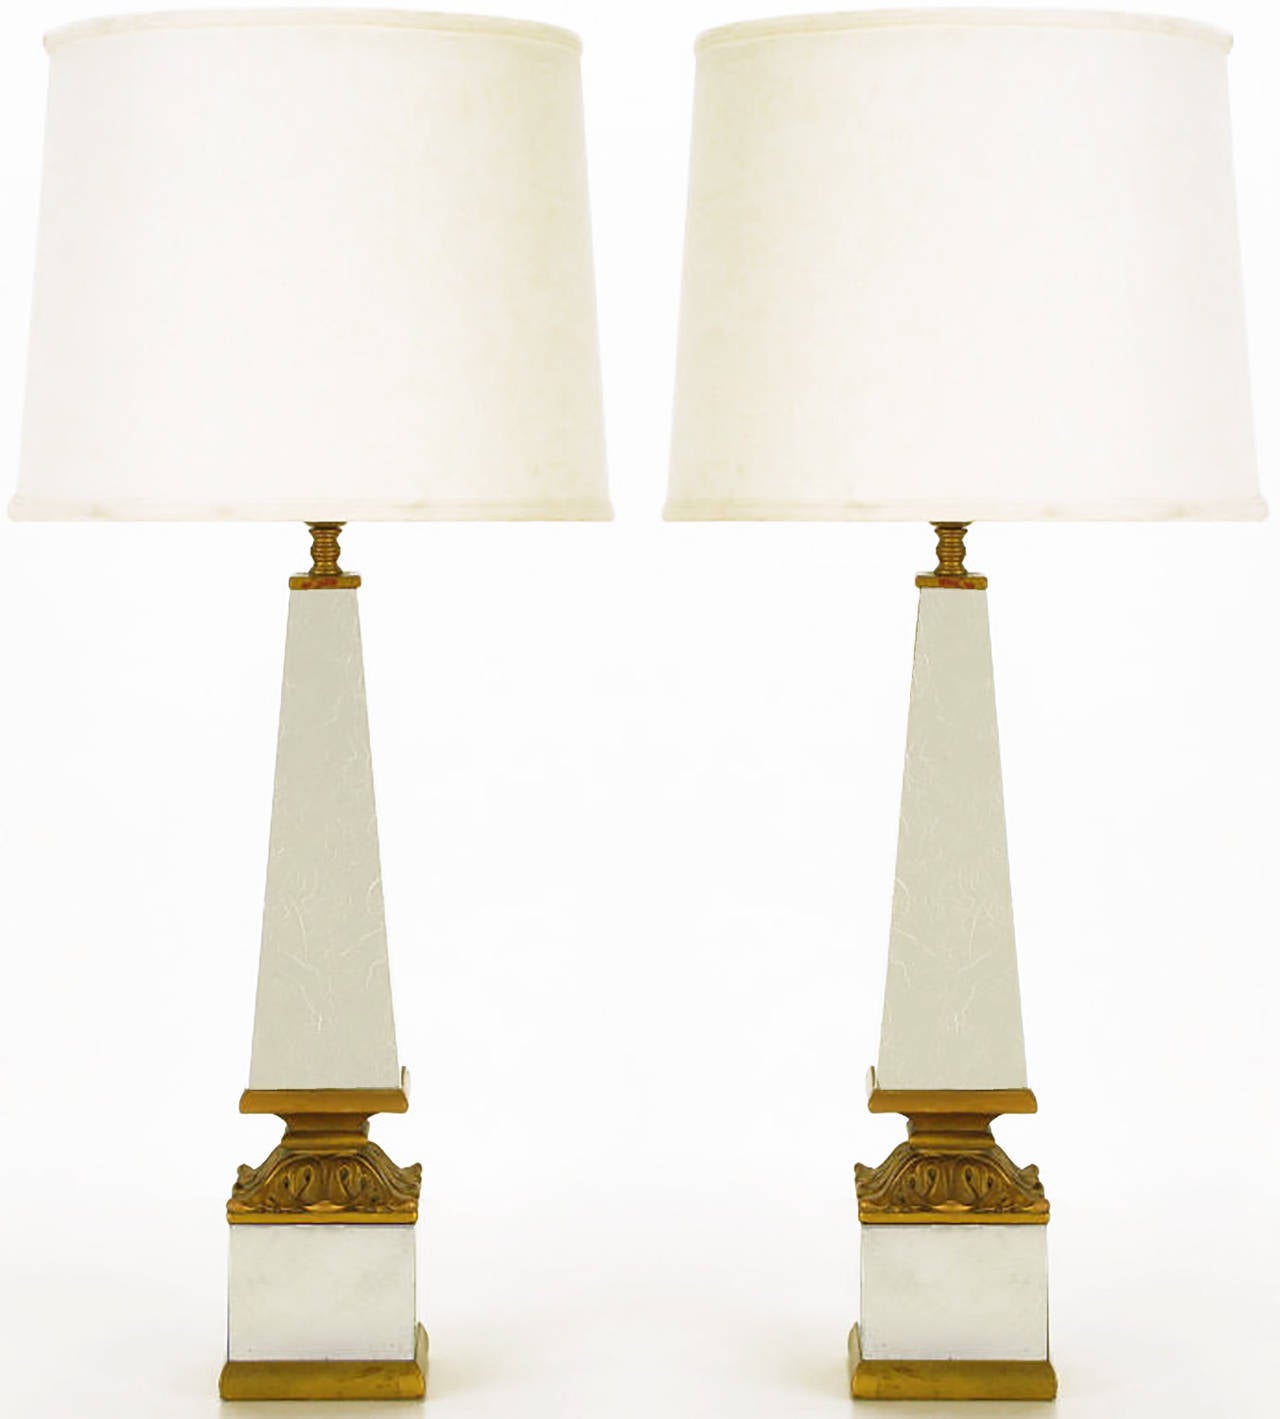 Exceptional pair of Rococo style Venetian mirror and giltwood obelisk form table lamps. Mirrored and giltwood block base with a gilt acanthus leaf cap. Veined Venetian mirrored obelisk form bodies with brass cups and milk glass diffusers.